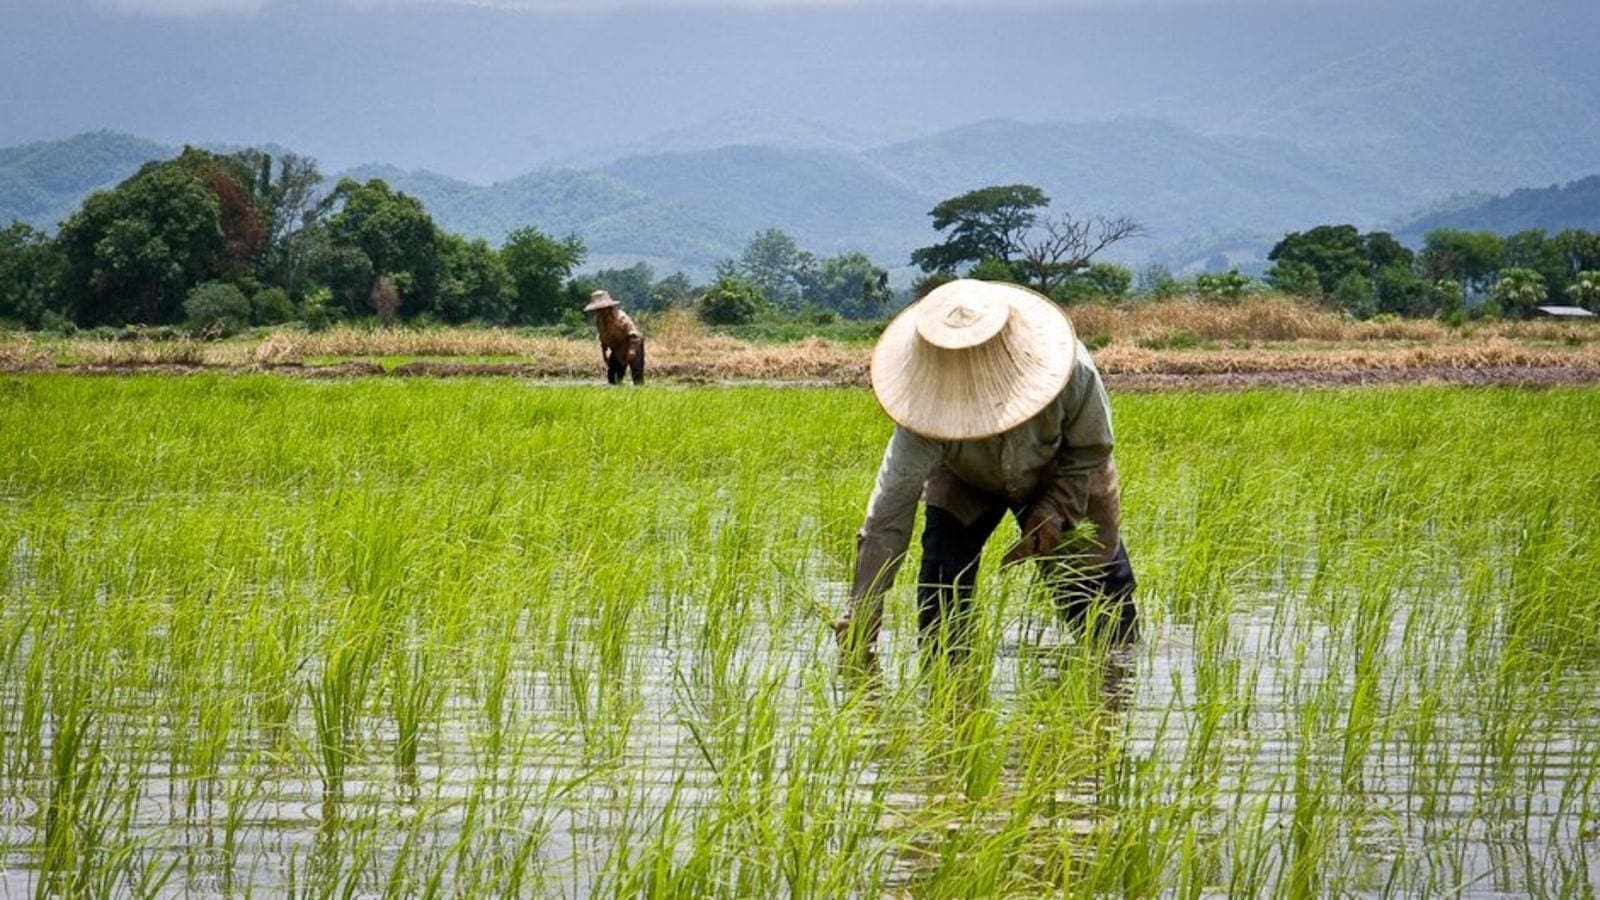 Thai rice prices are under downward pressure as supplies of MY2020/21 main-crop rice flood the market